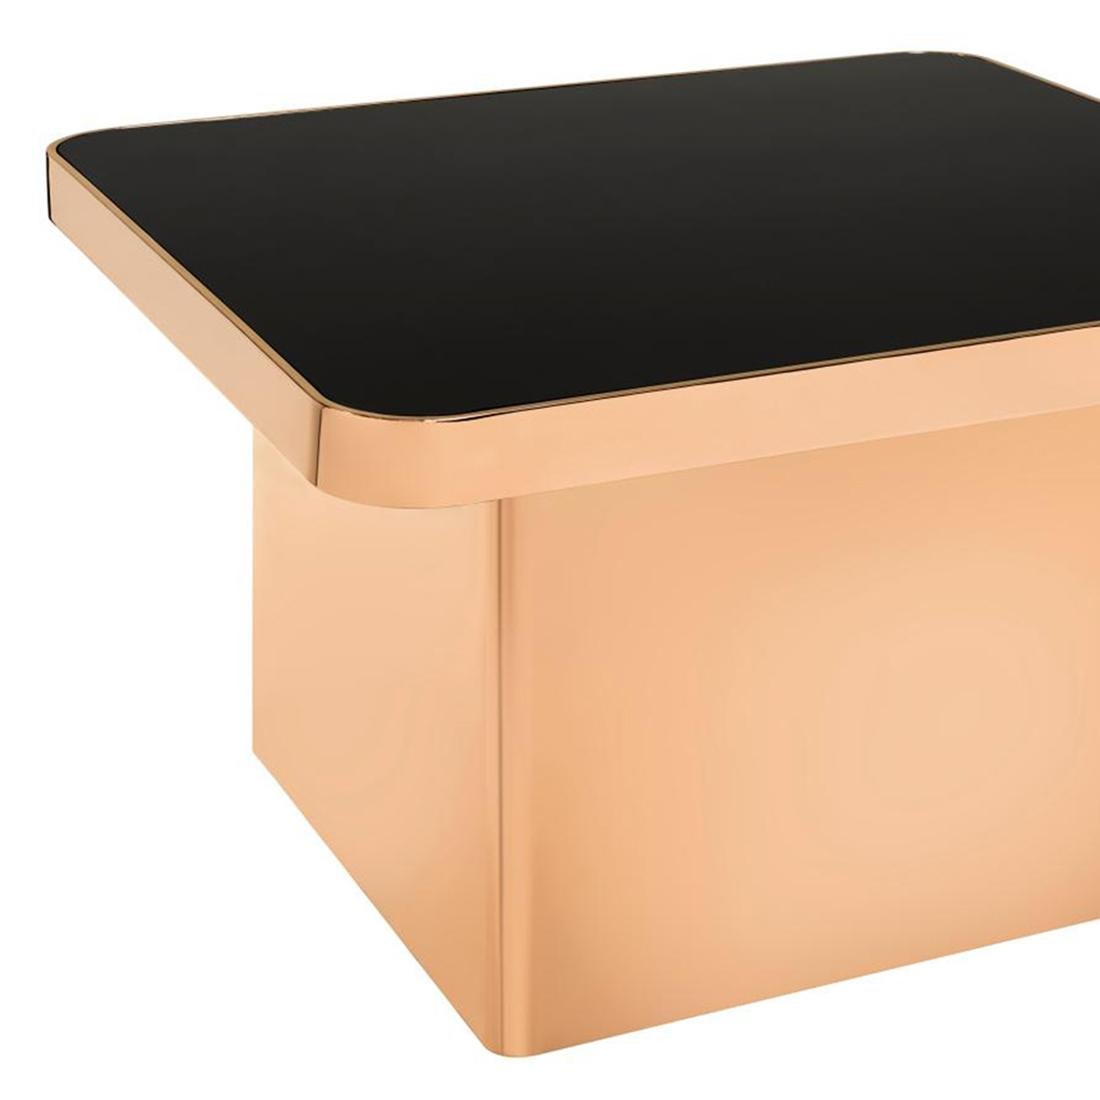 Center table rose gold with steel structure in light
rose gold chromed finish and with blackened glass top.